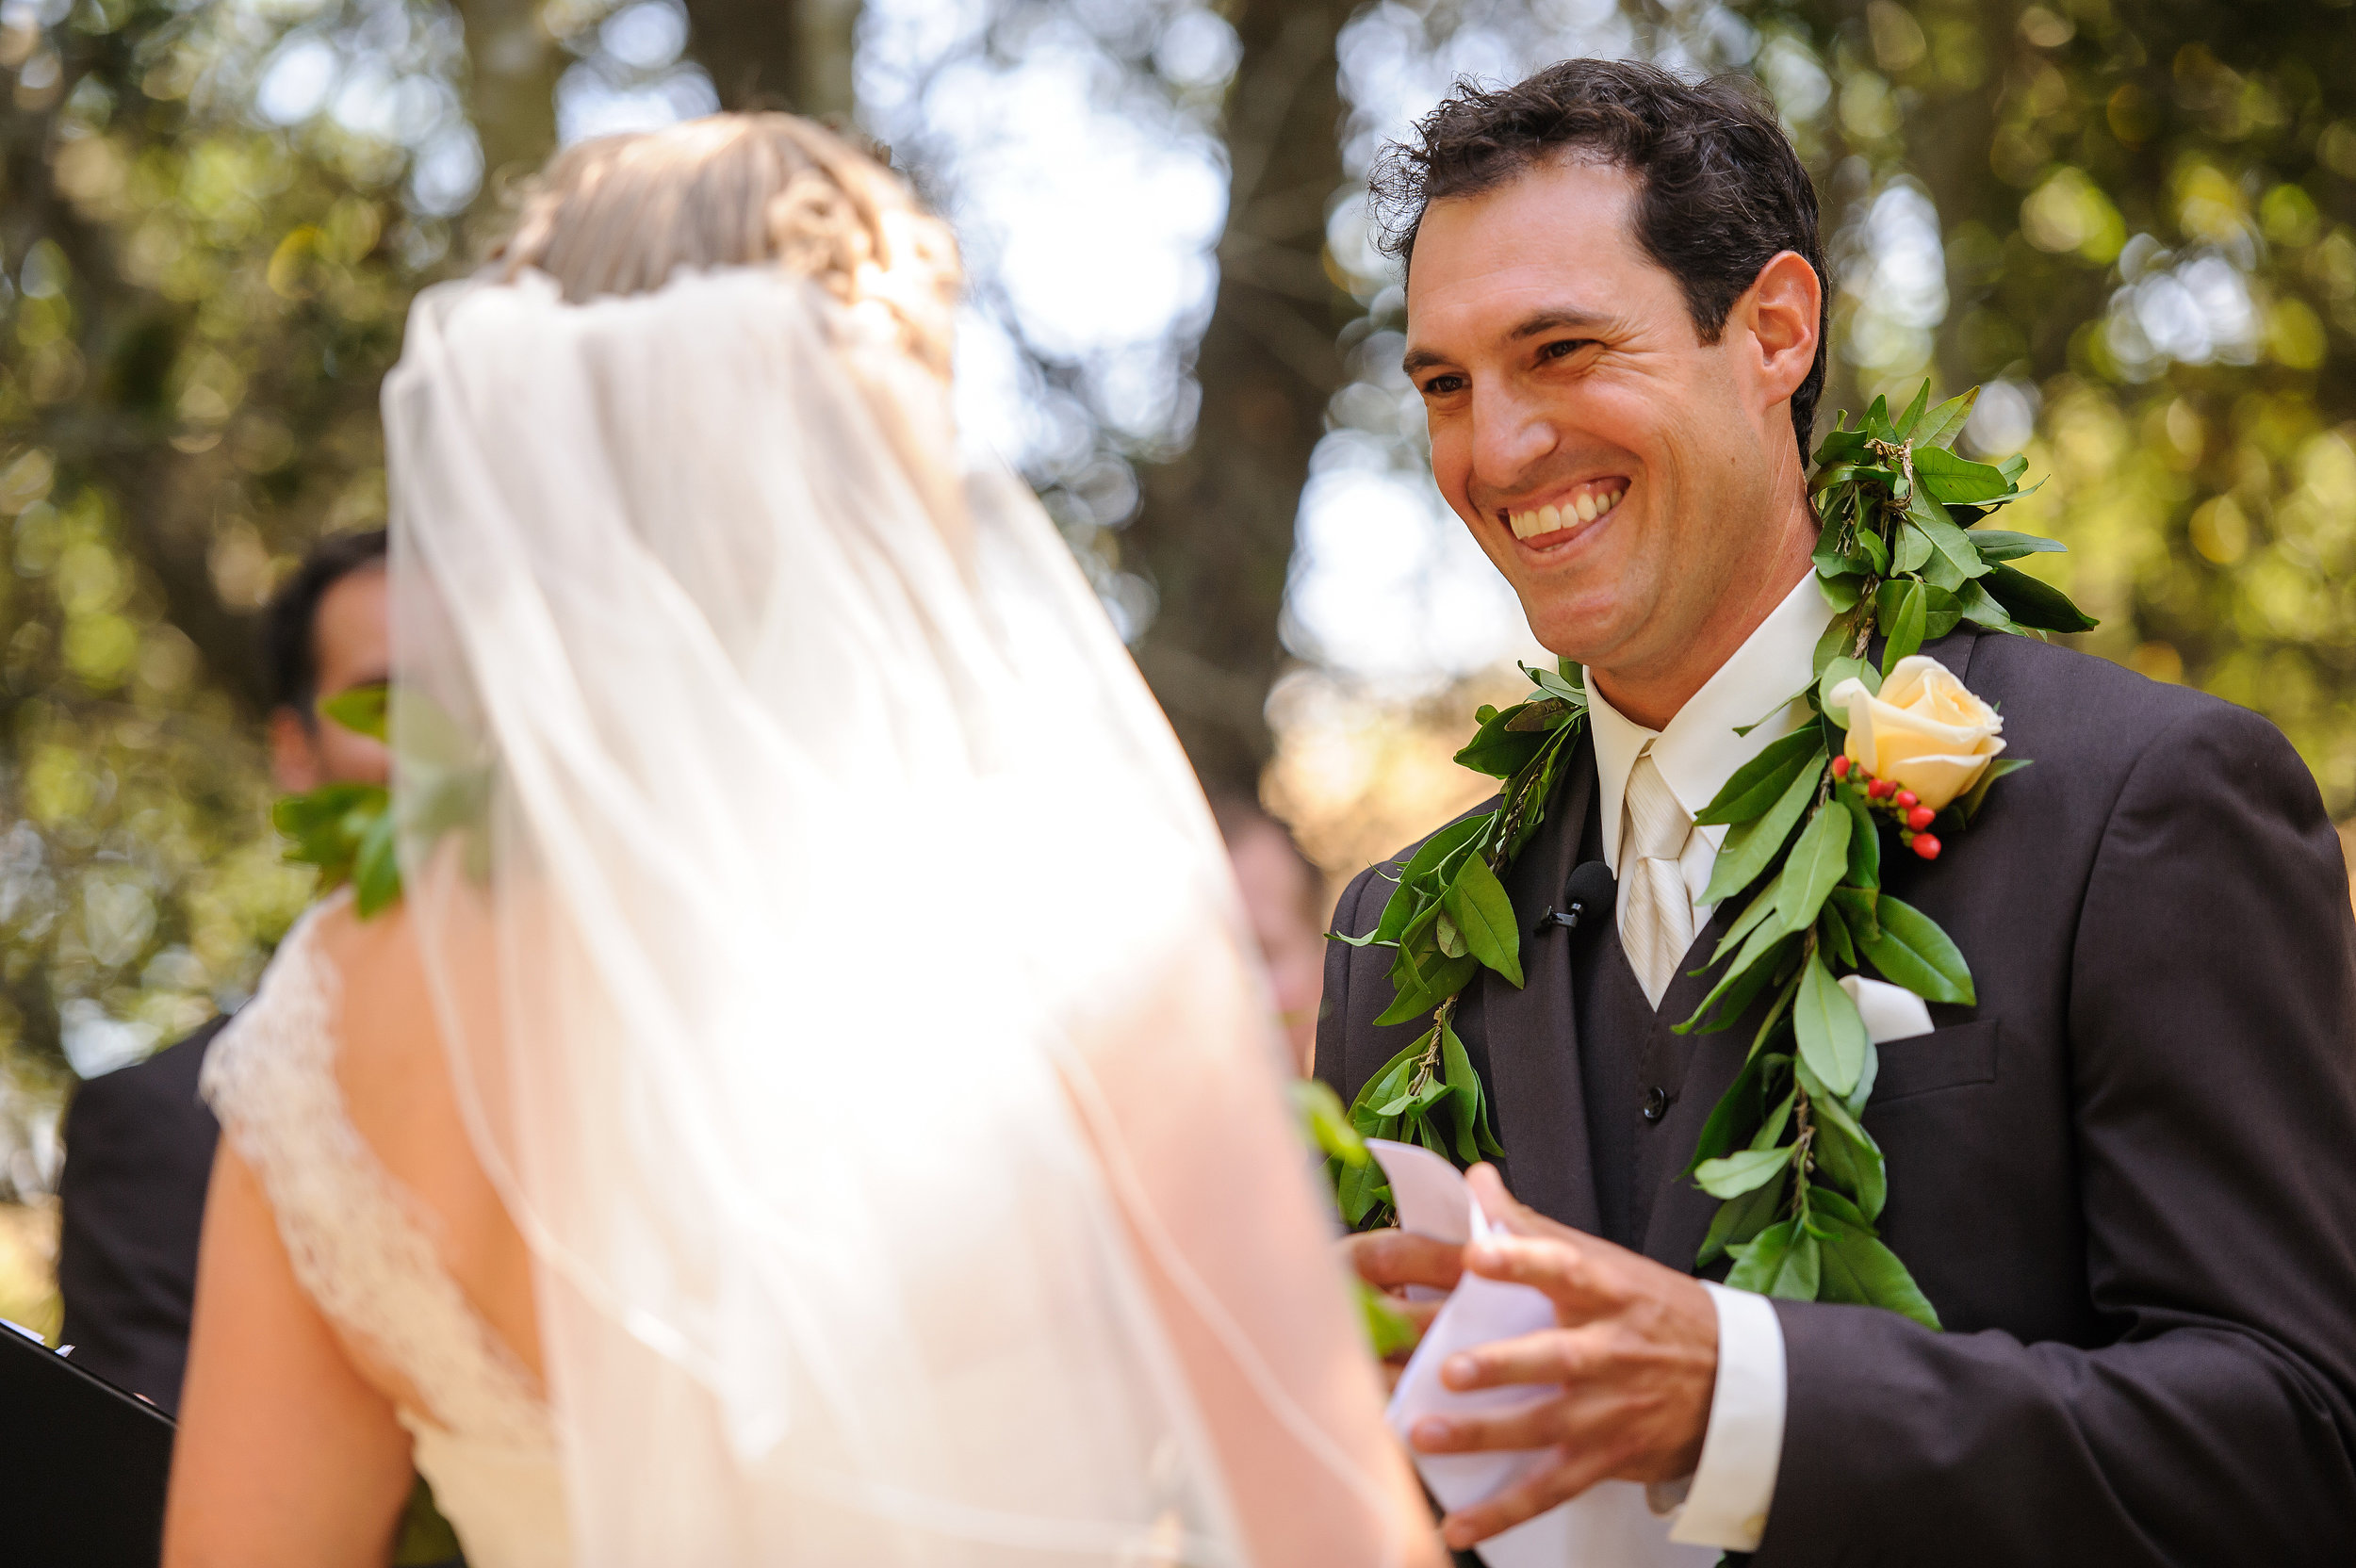  Groom's vows during wedding ceremony in Sonoma California. 